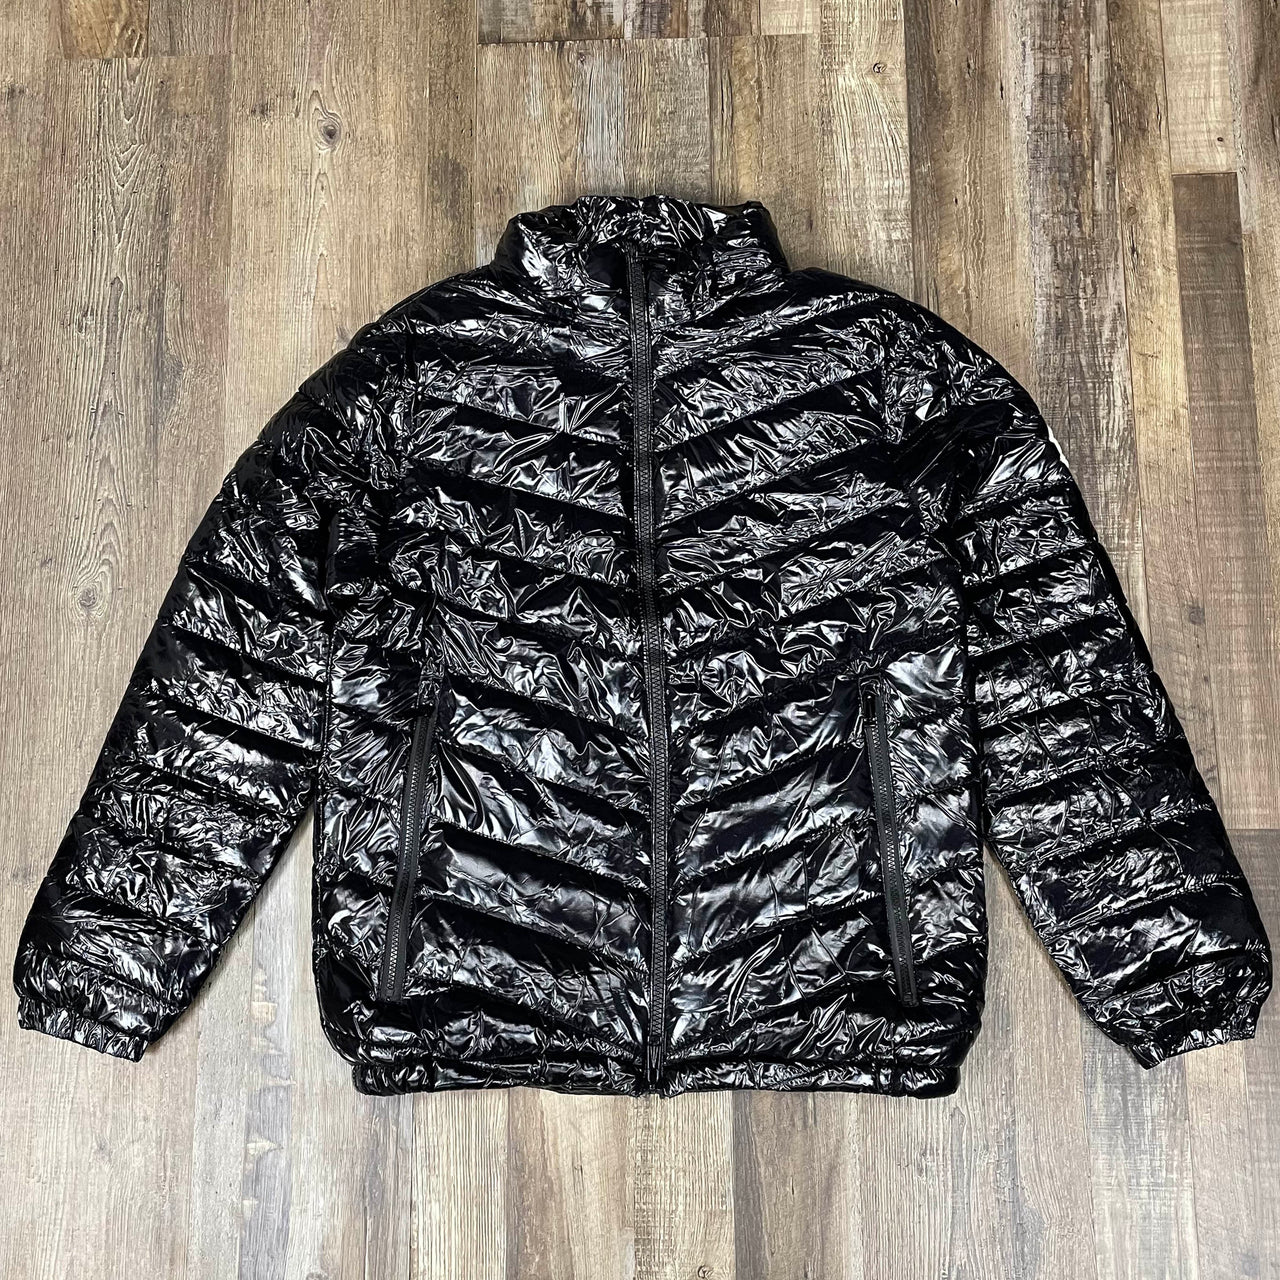 Glossy Metallic Shiny Men’s Puffer Jacket with Removable Hood | Black with hood removed